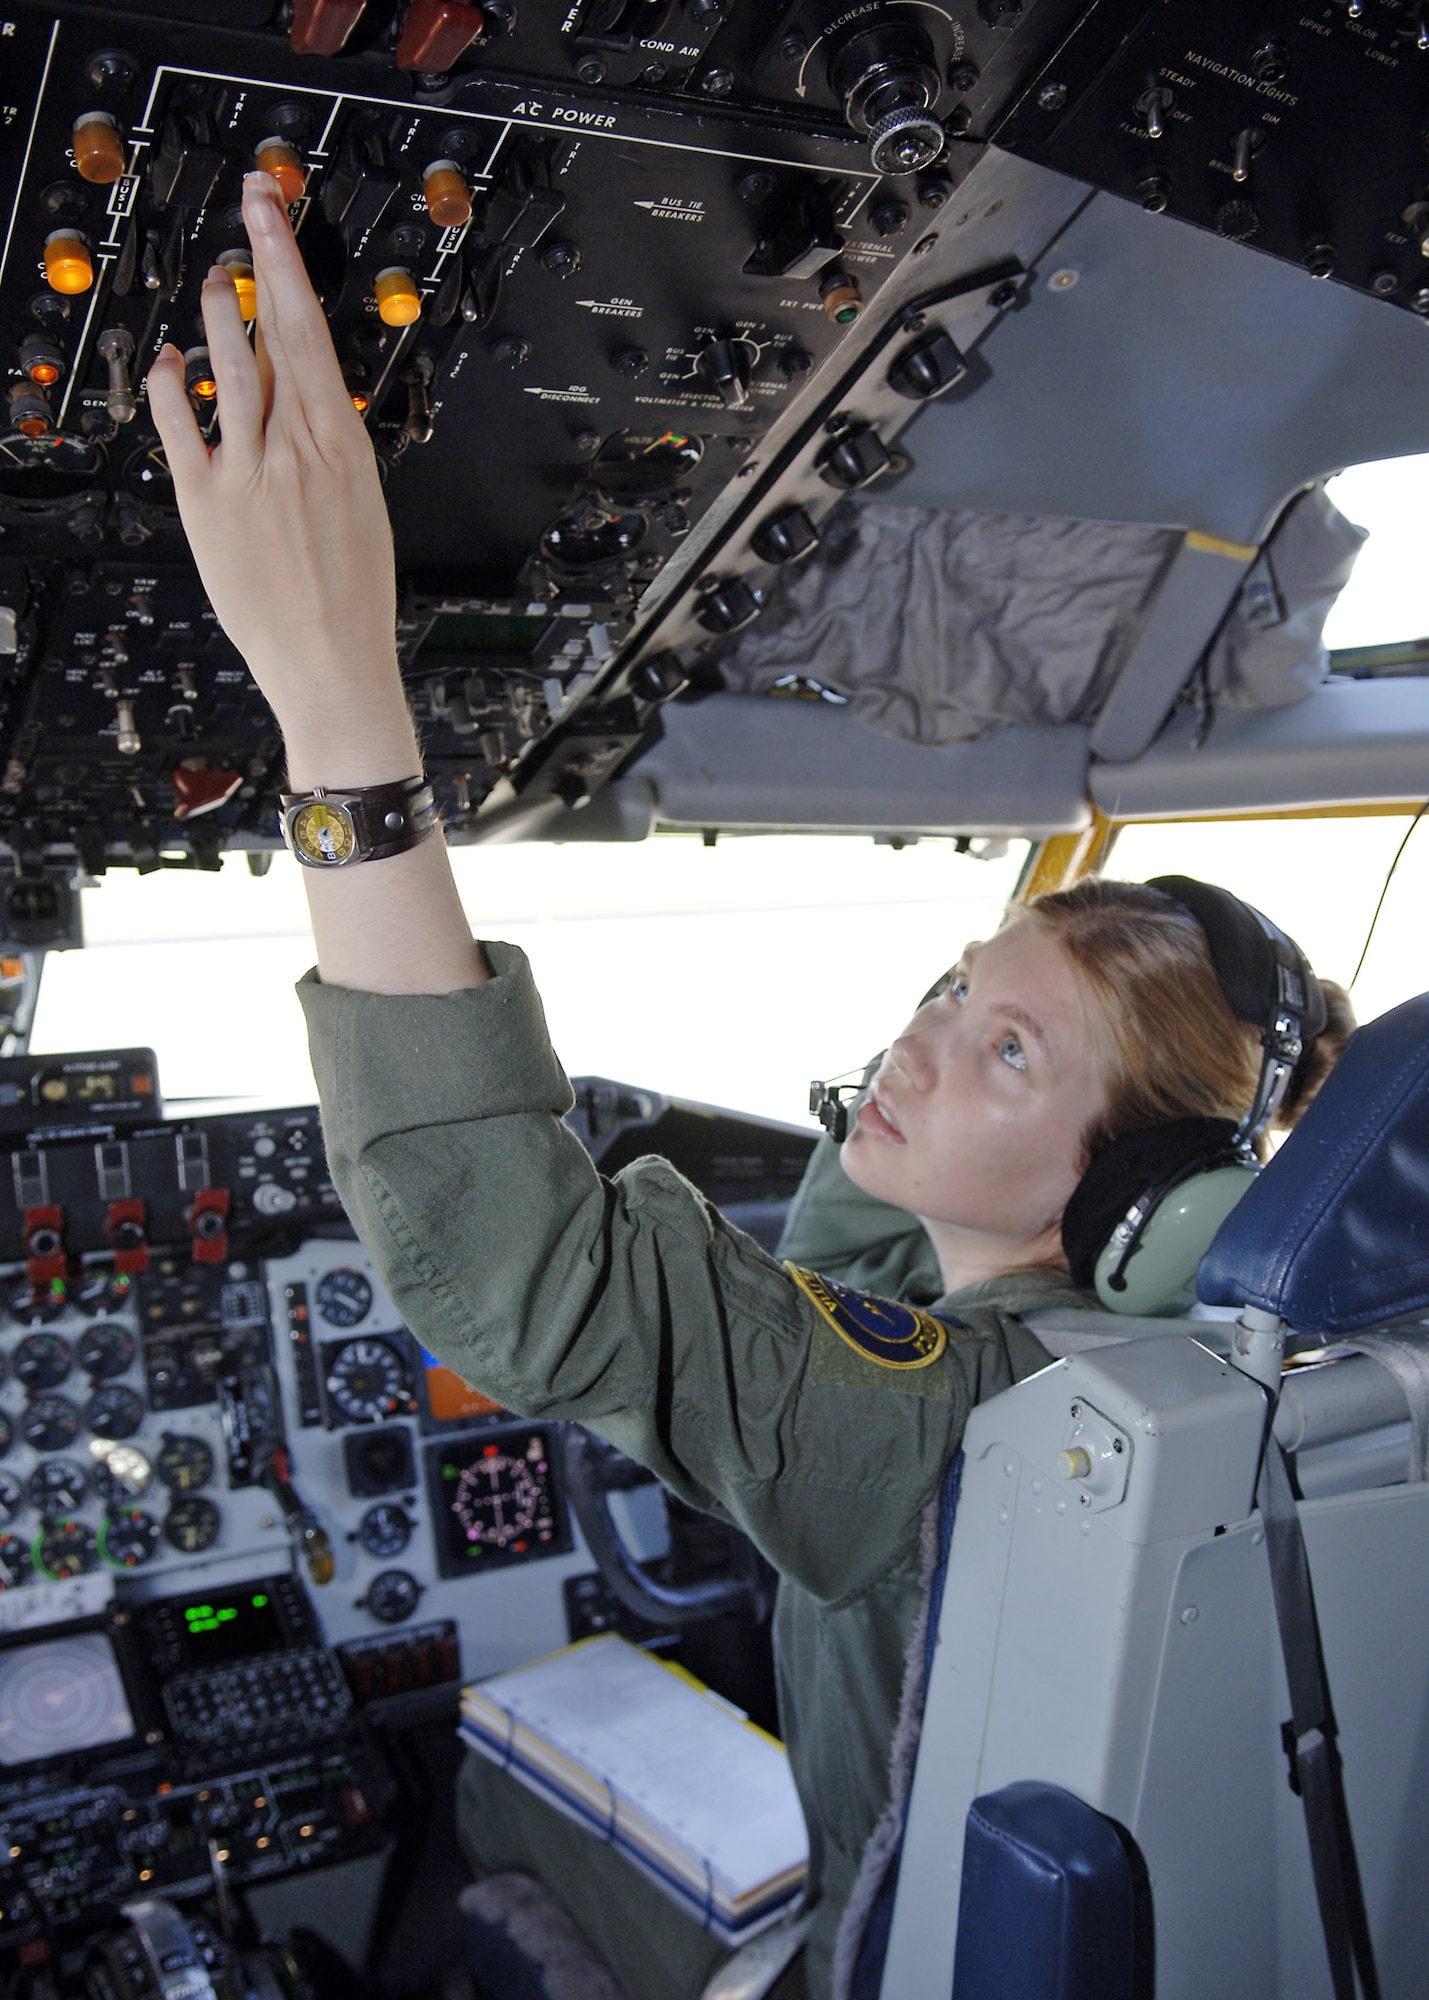 SCOTT AIR FORCE BASE, Ill. -- 1st Lt. Viveca Lane, a KC-135 Stratotanker pilot from the 126th Air Refueling Wing, Illinois Air National Guard, Scott AFB, IL., conducts pre-flight checks before a mission.
(US Air Force photo/Tech. Sergeant Tony Tolley)